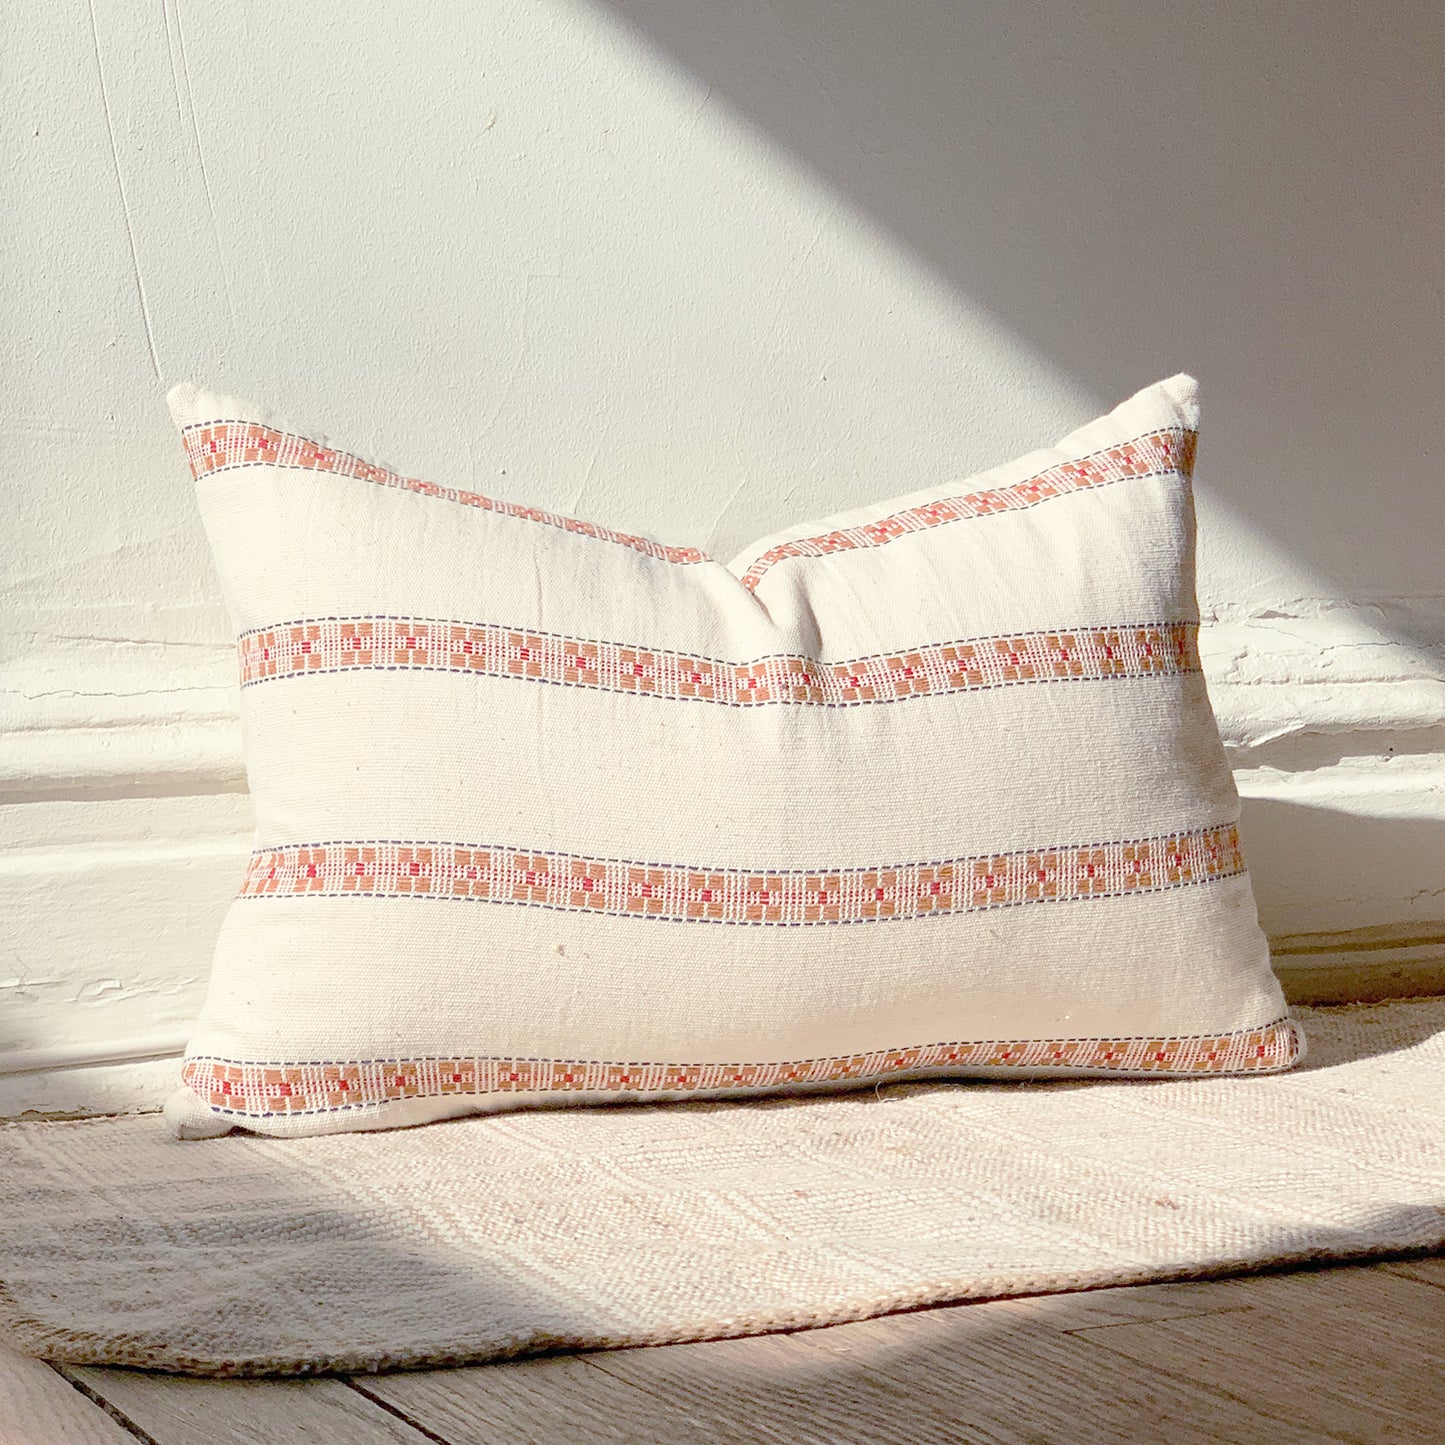 Handmade natural cotton throw pillow with patterned stripes and orange color accents